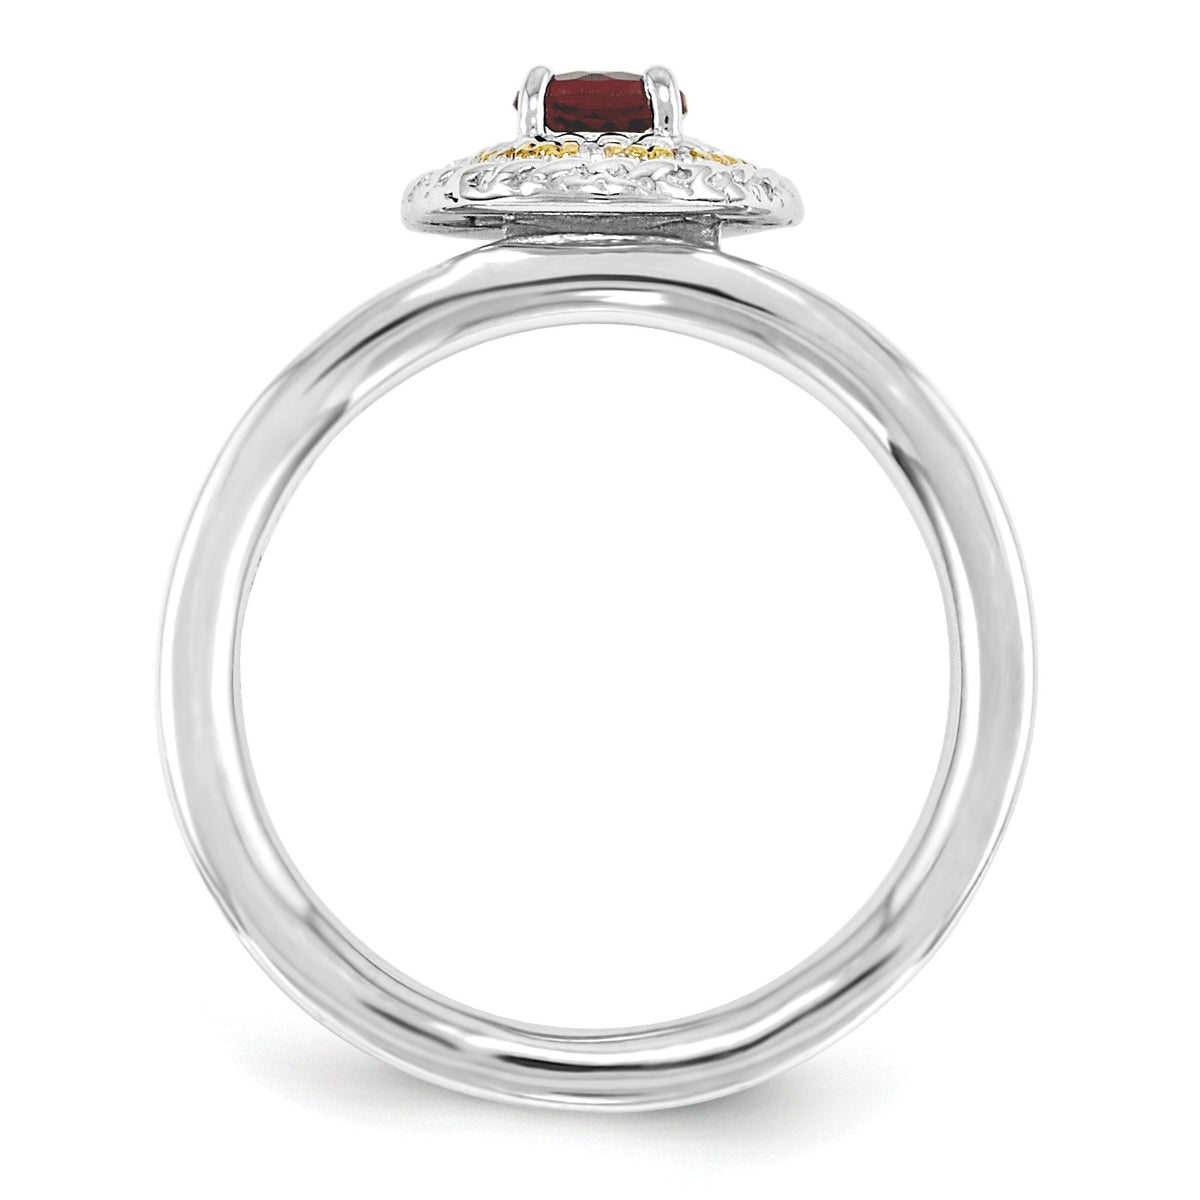 Alternate view of the Sterling Silver14k Yellow Gold PlateGarnet Stackable 9mm Round Ring by The Black Bow Jewelry Co.